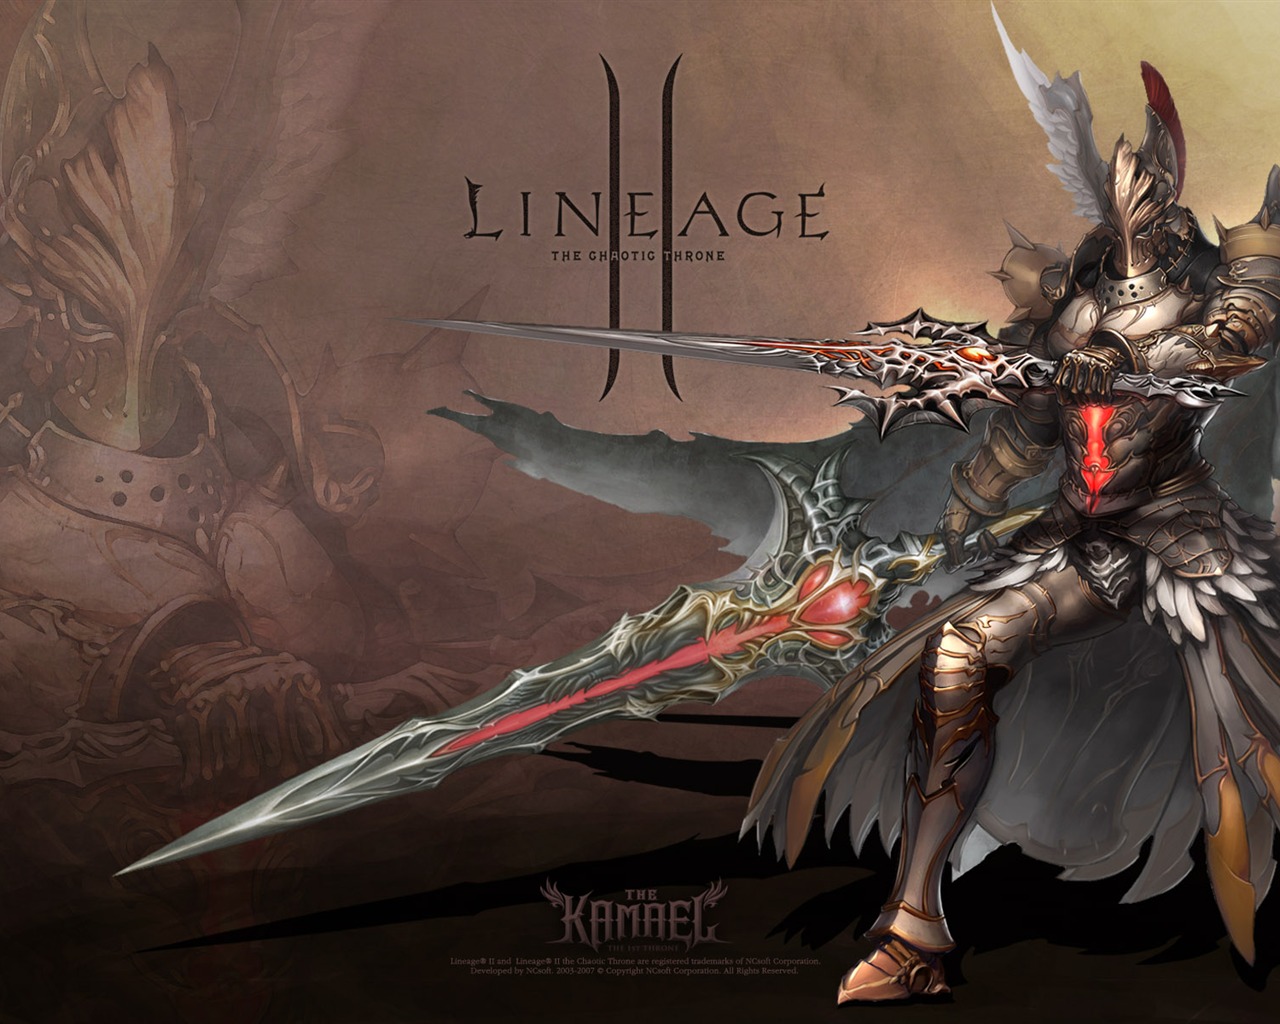 LINEAGE Ⅱ modeling HD gaming wallpapers #9 - 1280x1024